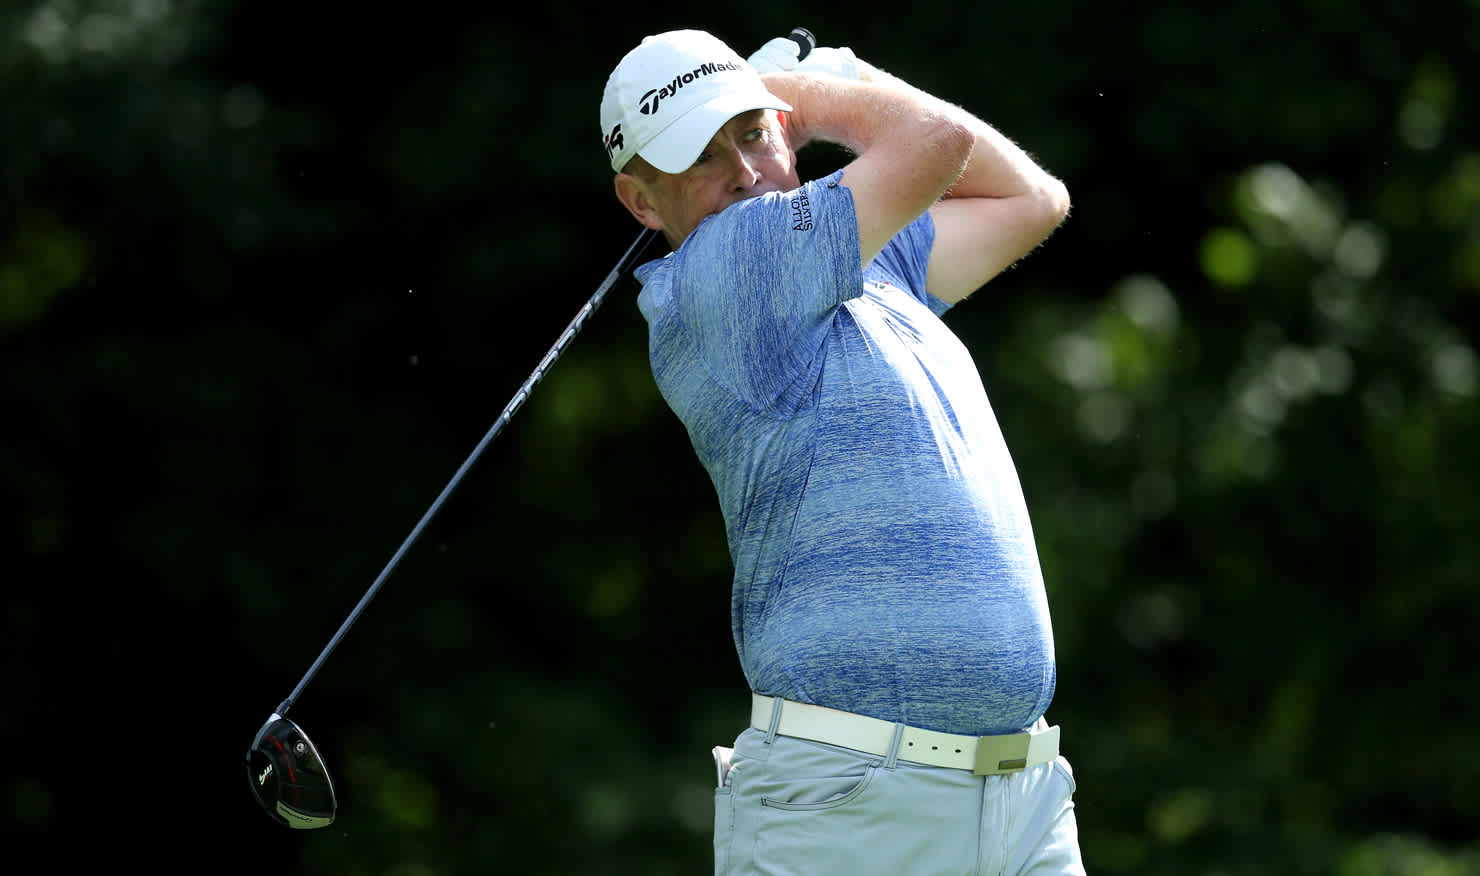 Stephen Allan had to work overtime to get back into the major championship fold.